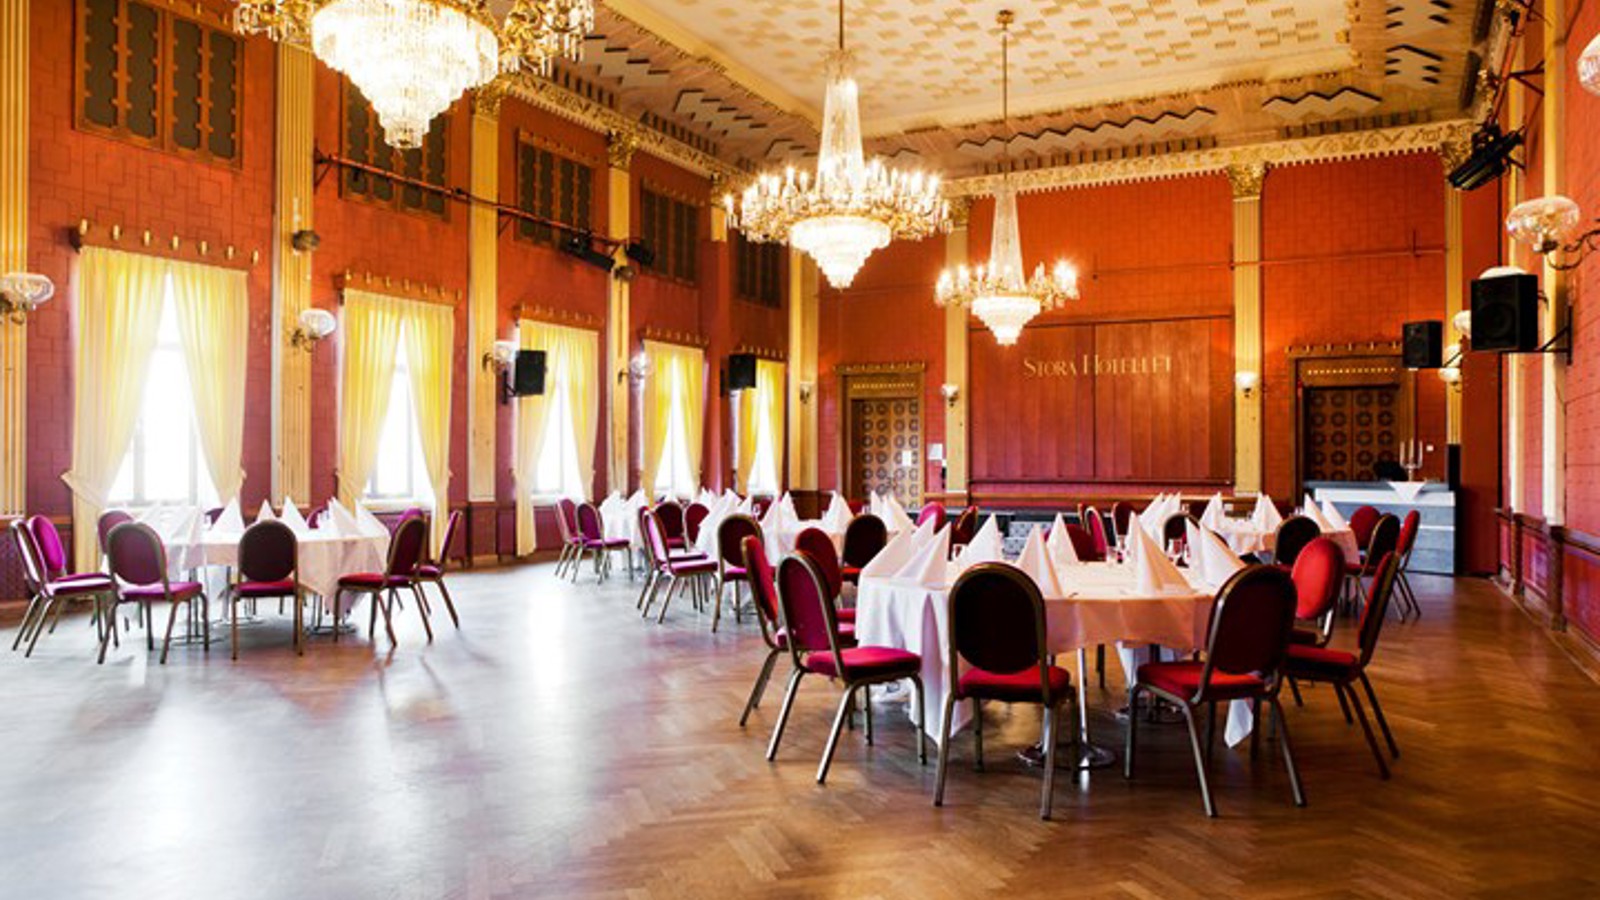 Large party room with red walls, wooden floors and gold details